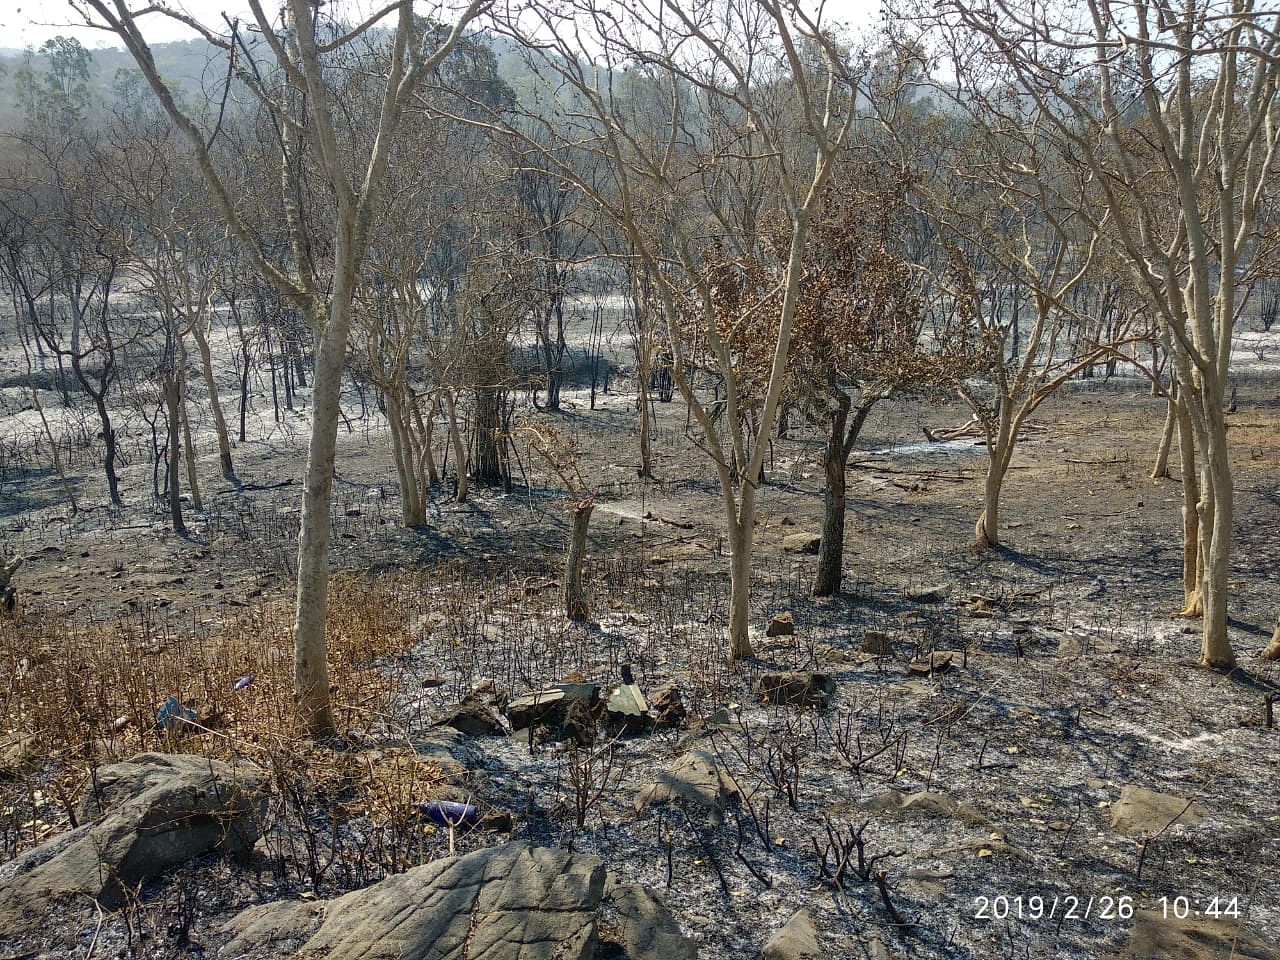 A release signed by Principal Chief Conservator of Forests Punati Sridhar said miscreants were spreading wrong information about the fire, giving an impression that all trees and animals were burnt. File photo